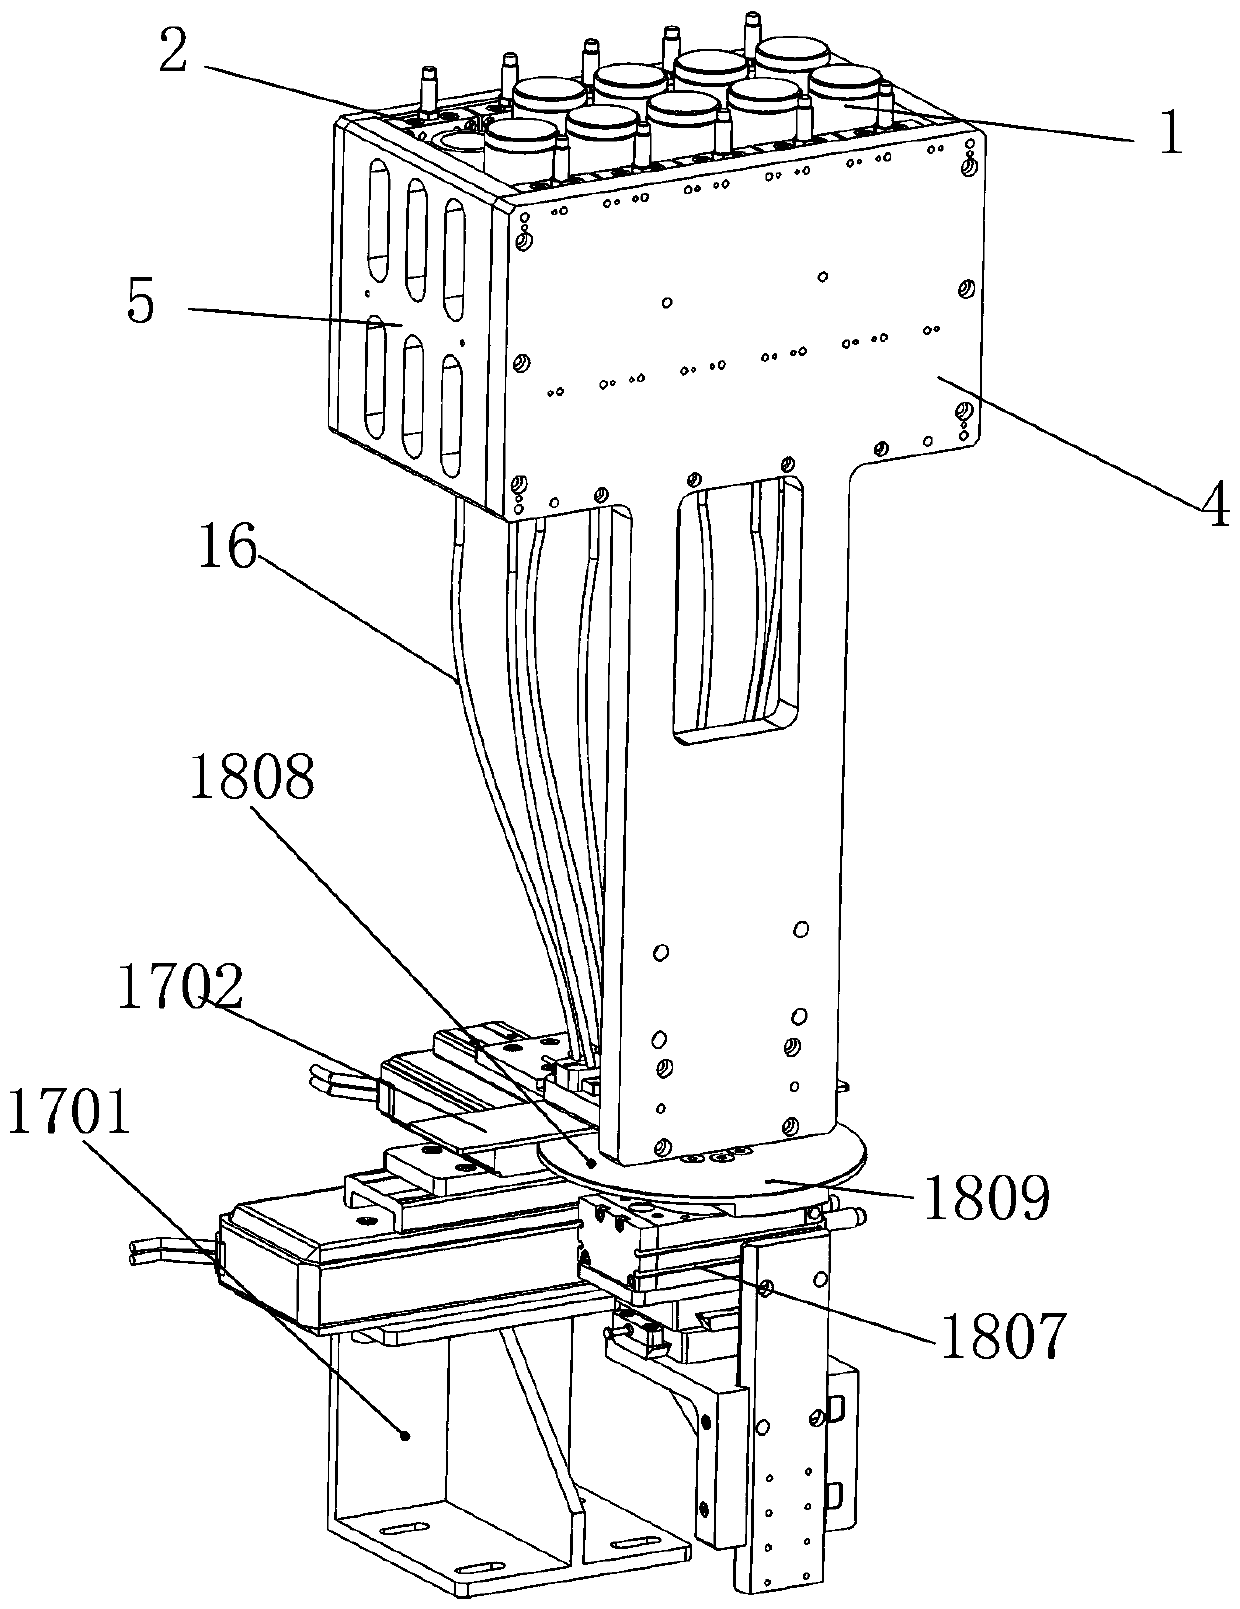 Automatic feeding equipment capable of precisely conveying ceramic columns